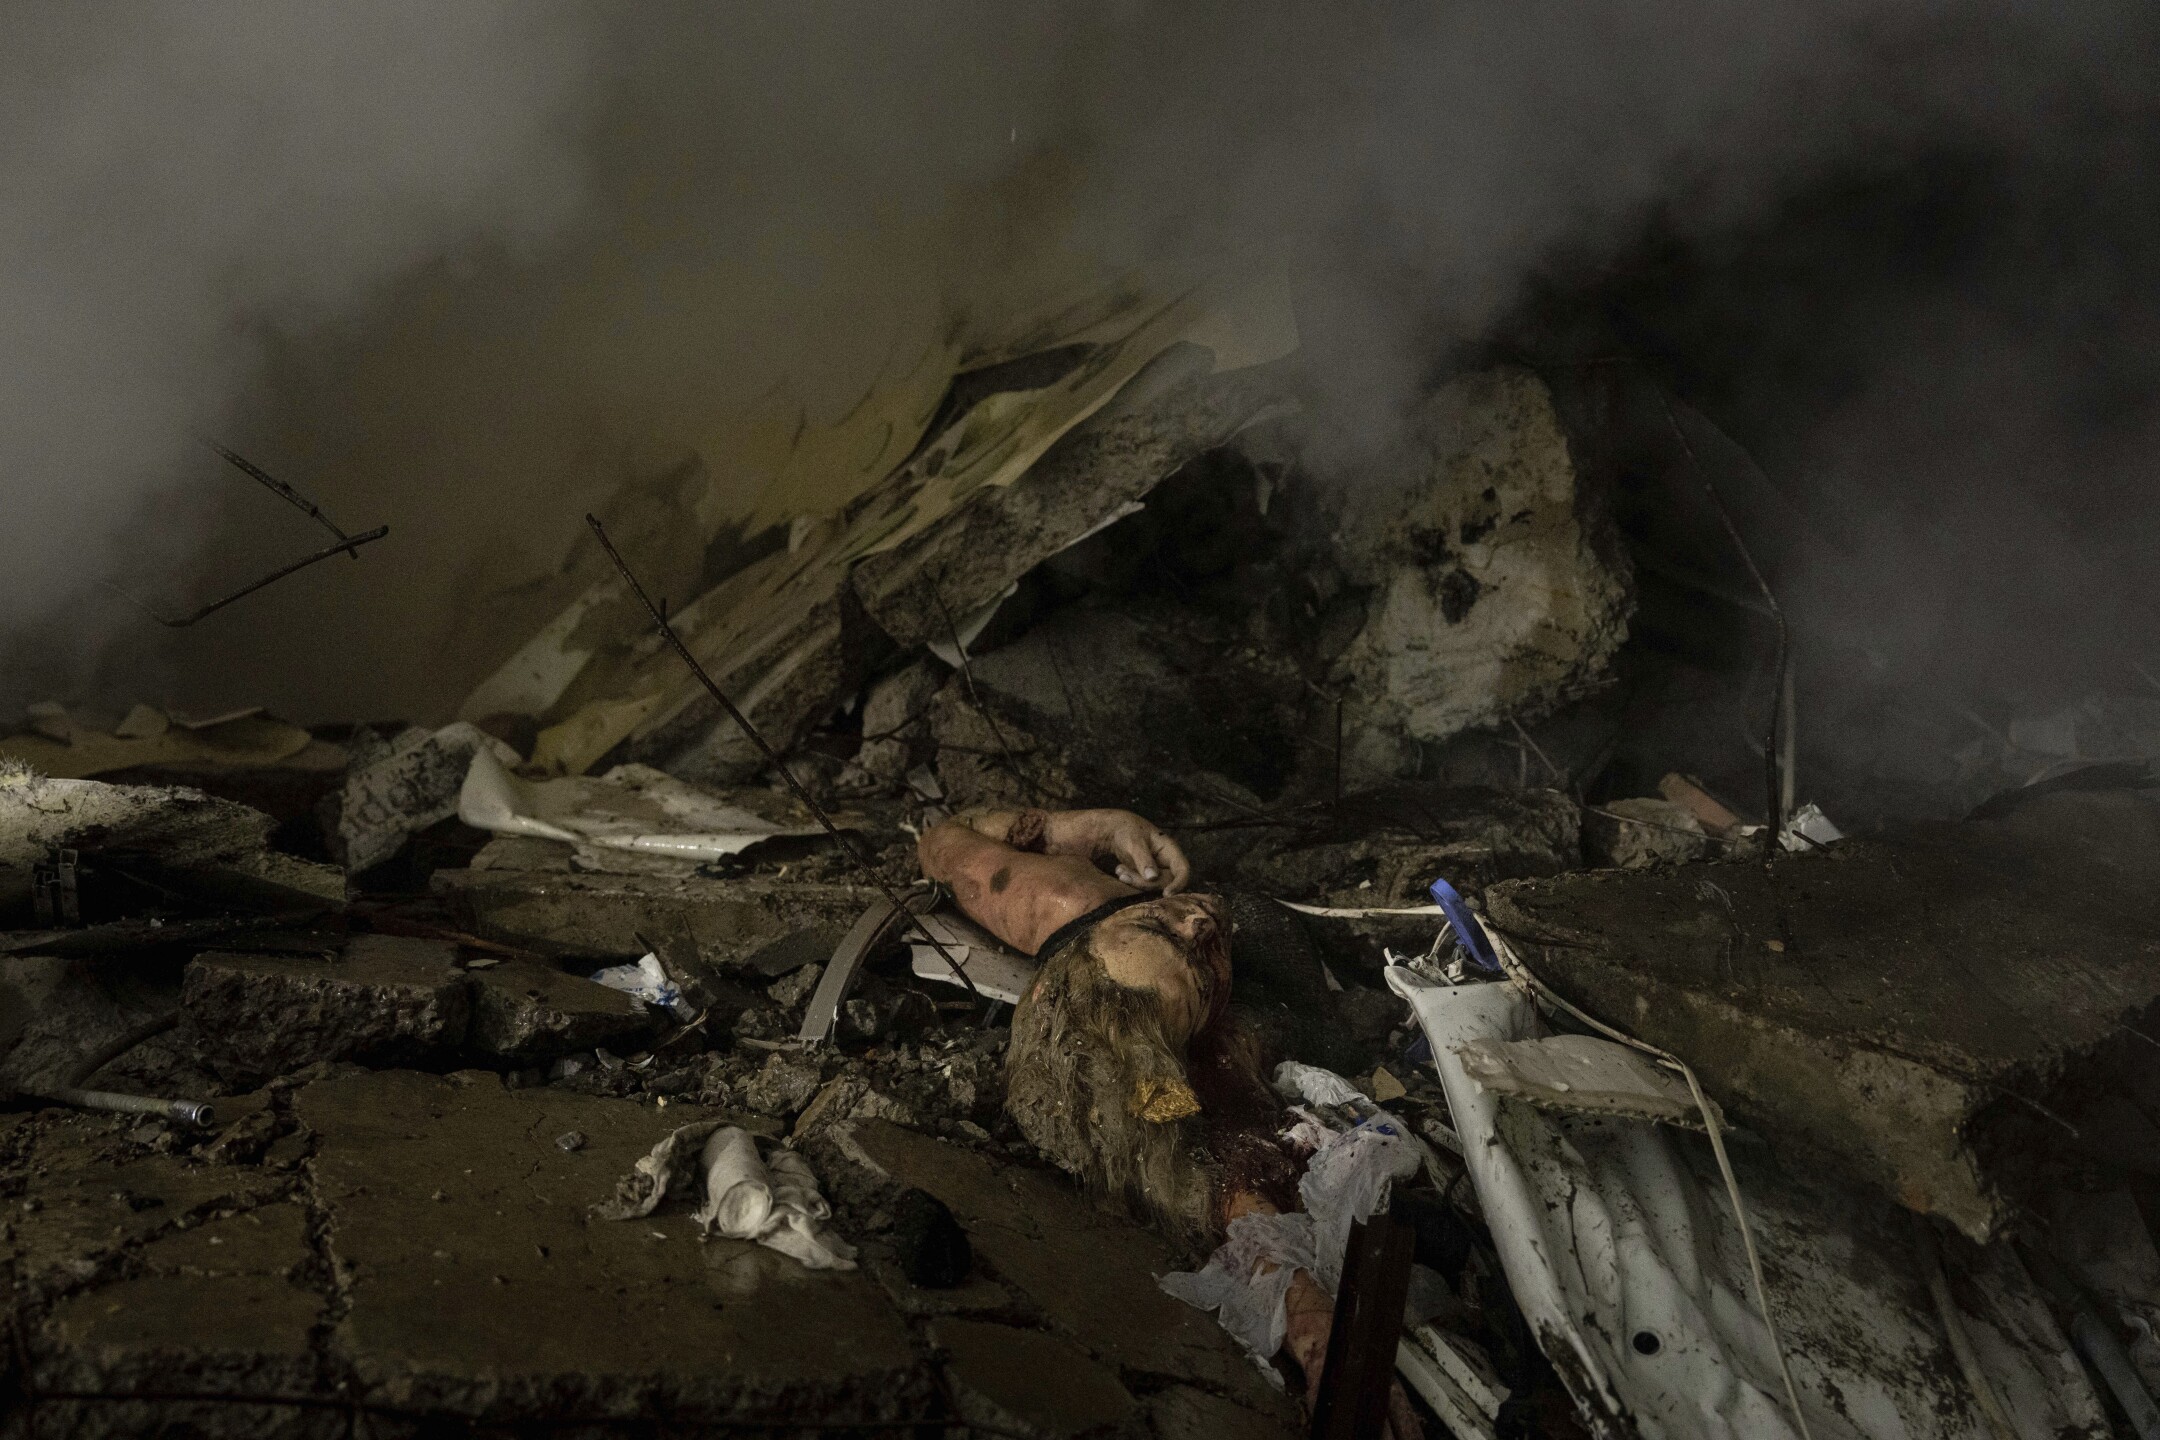 EDS NOTE: GRAPHIC CONTENT - The body of a woman who was killed in a Russian rocket attack on a multistory building lies under rubble in the southeastern city of Dnipro, Ukraine, on Jan. 14, 2023. (AP Photo/Evgeniy Maloletka)